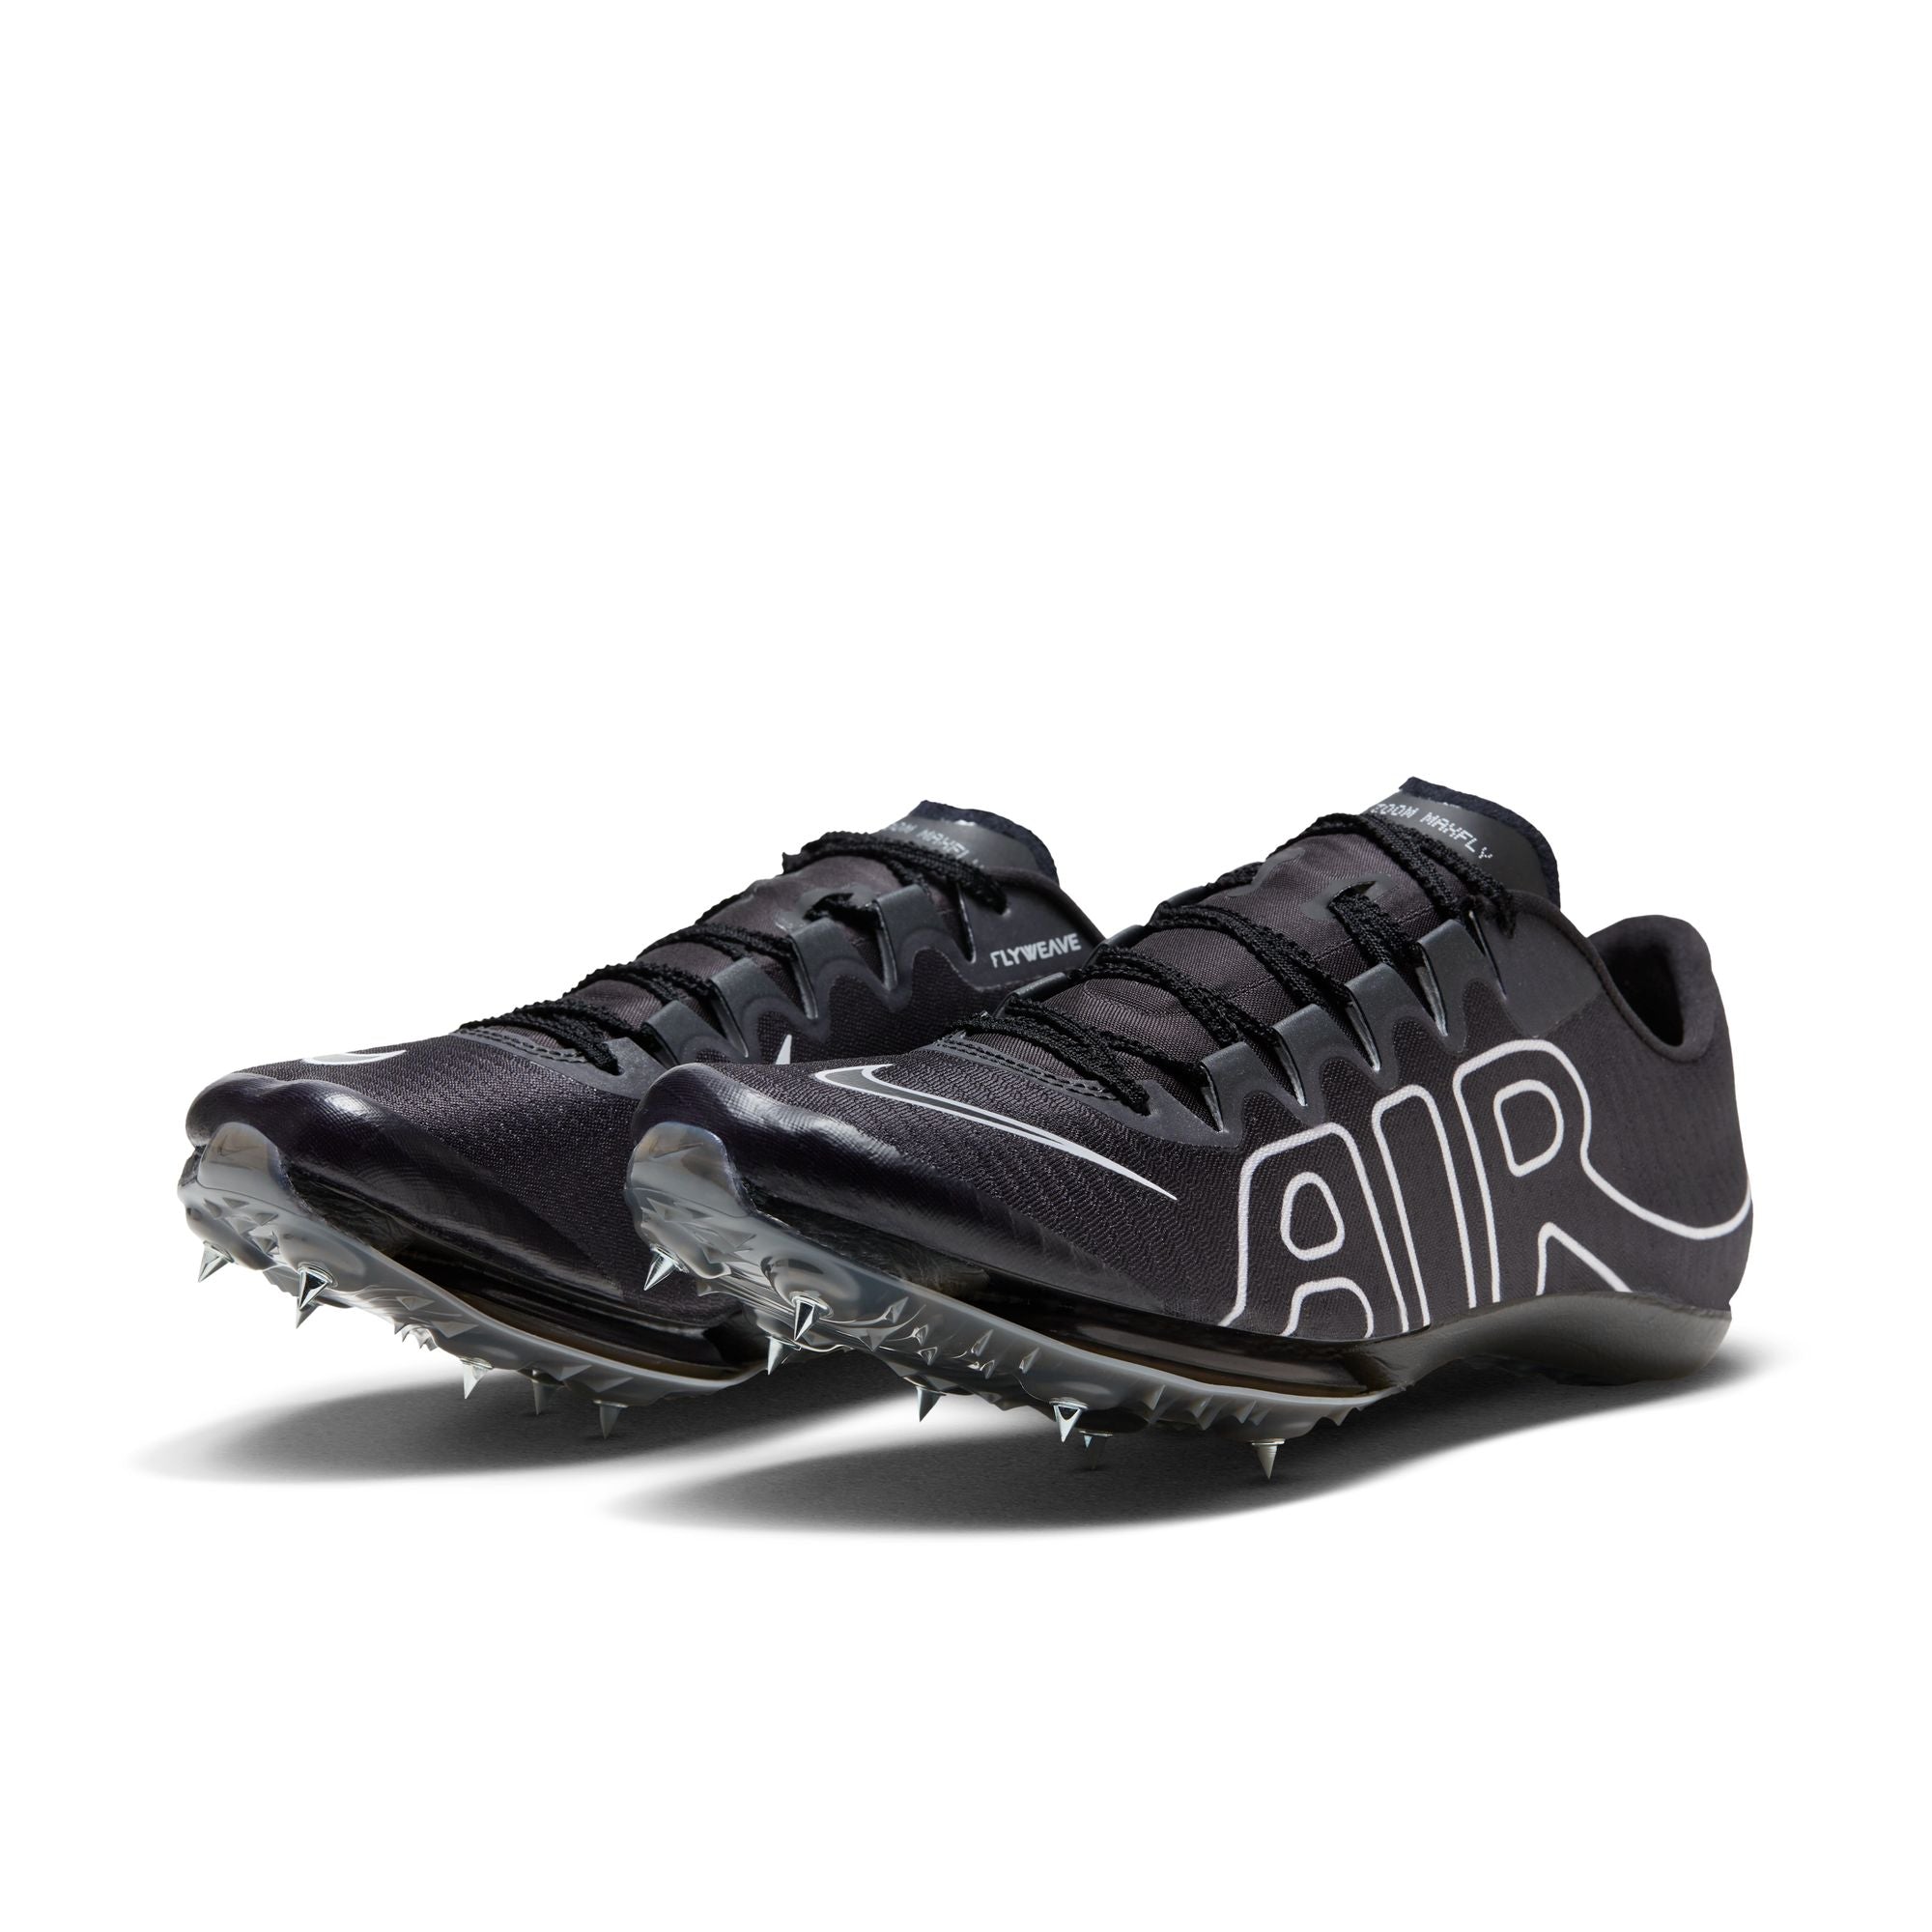 Nike Men's Air Zoom Maxfly More Uptempo Track & Field Sprinting Spikes